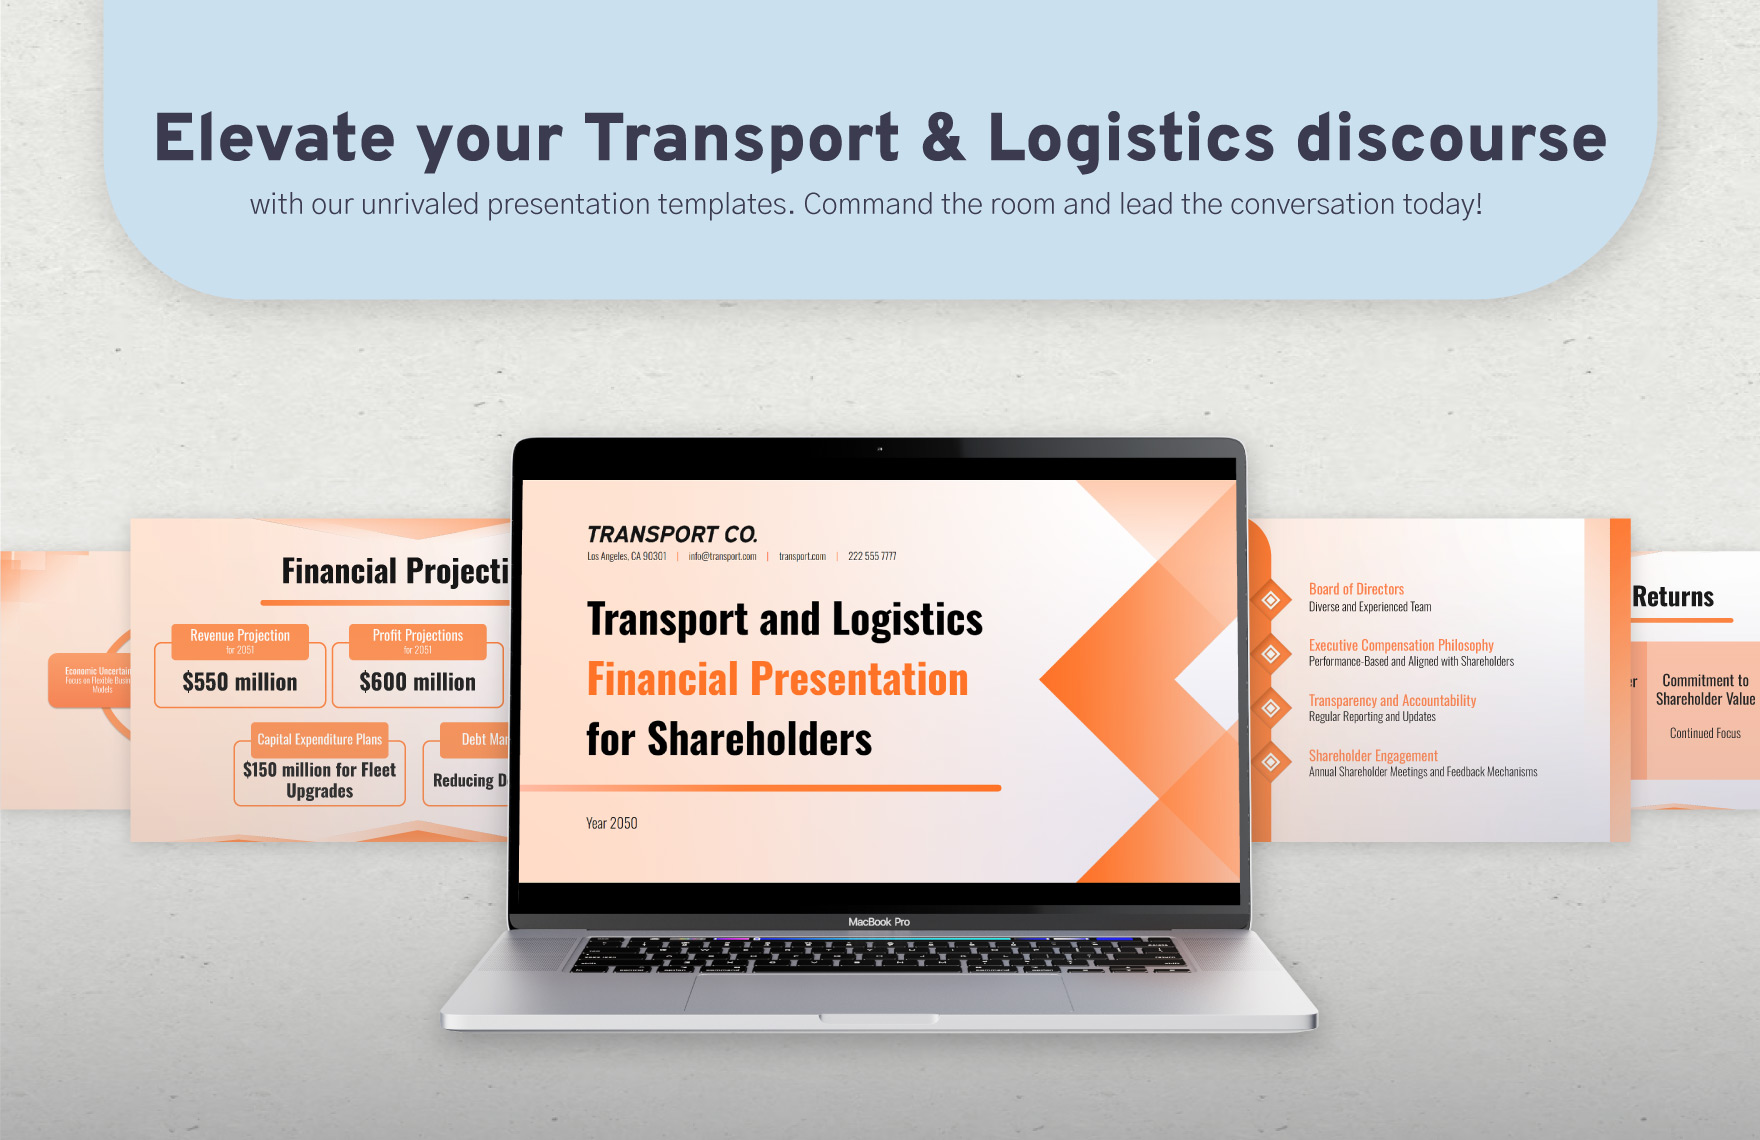 Transport and Logistics Financial Presentation for Shareholders Template